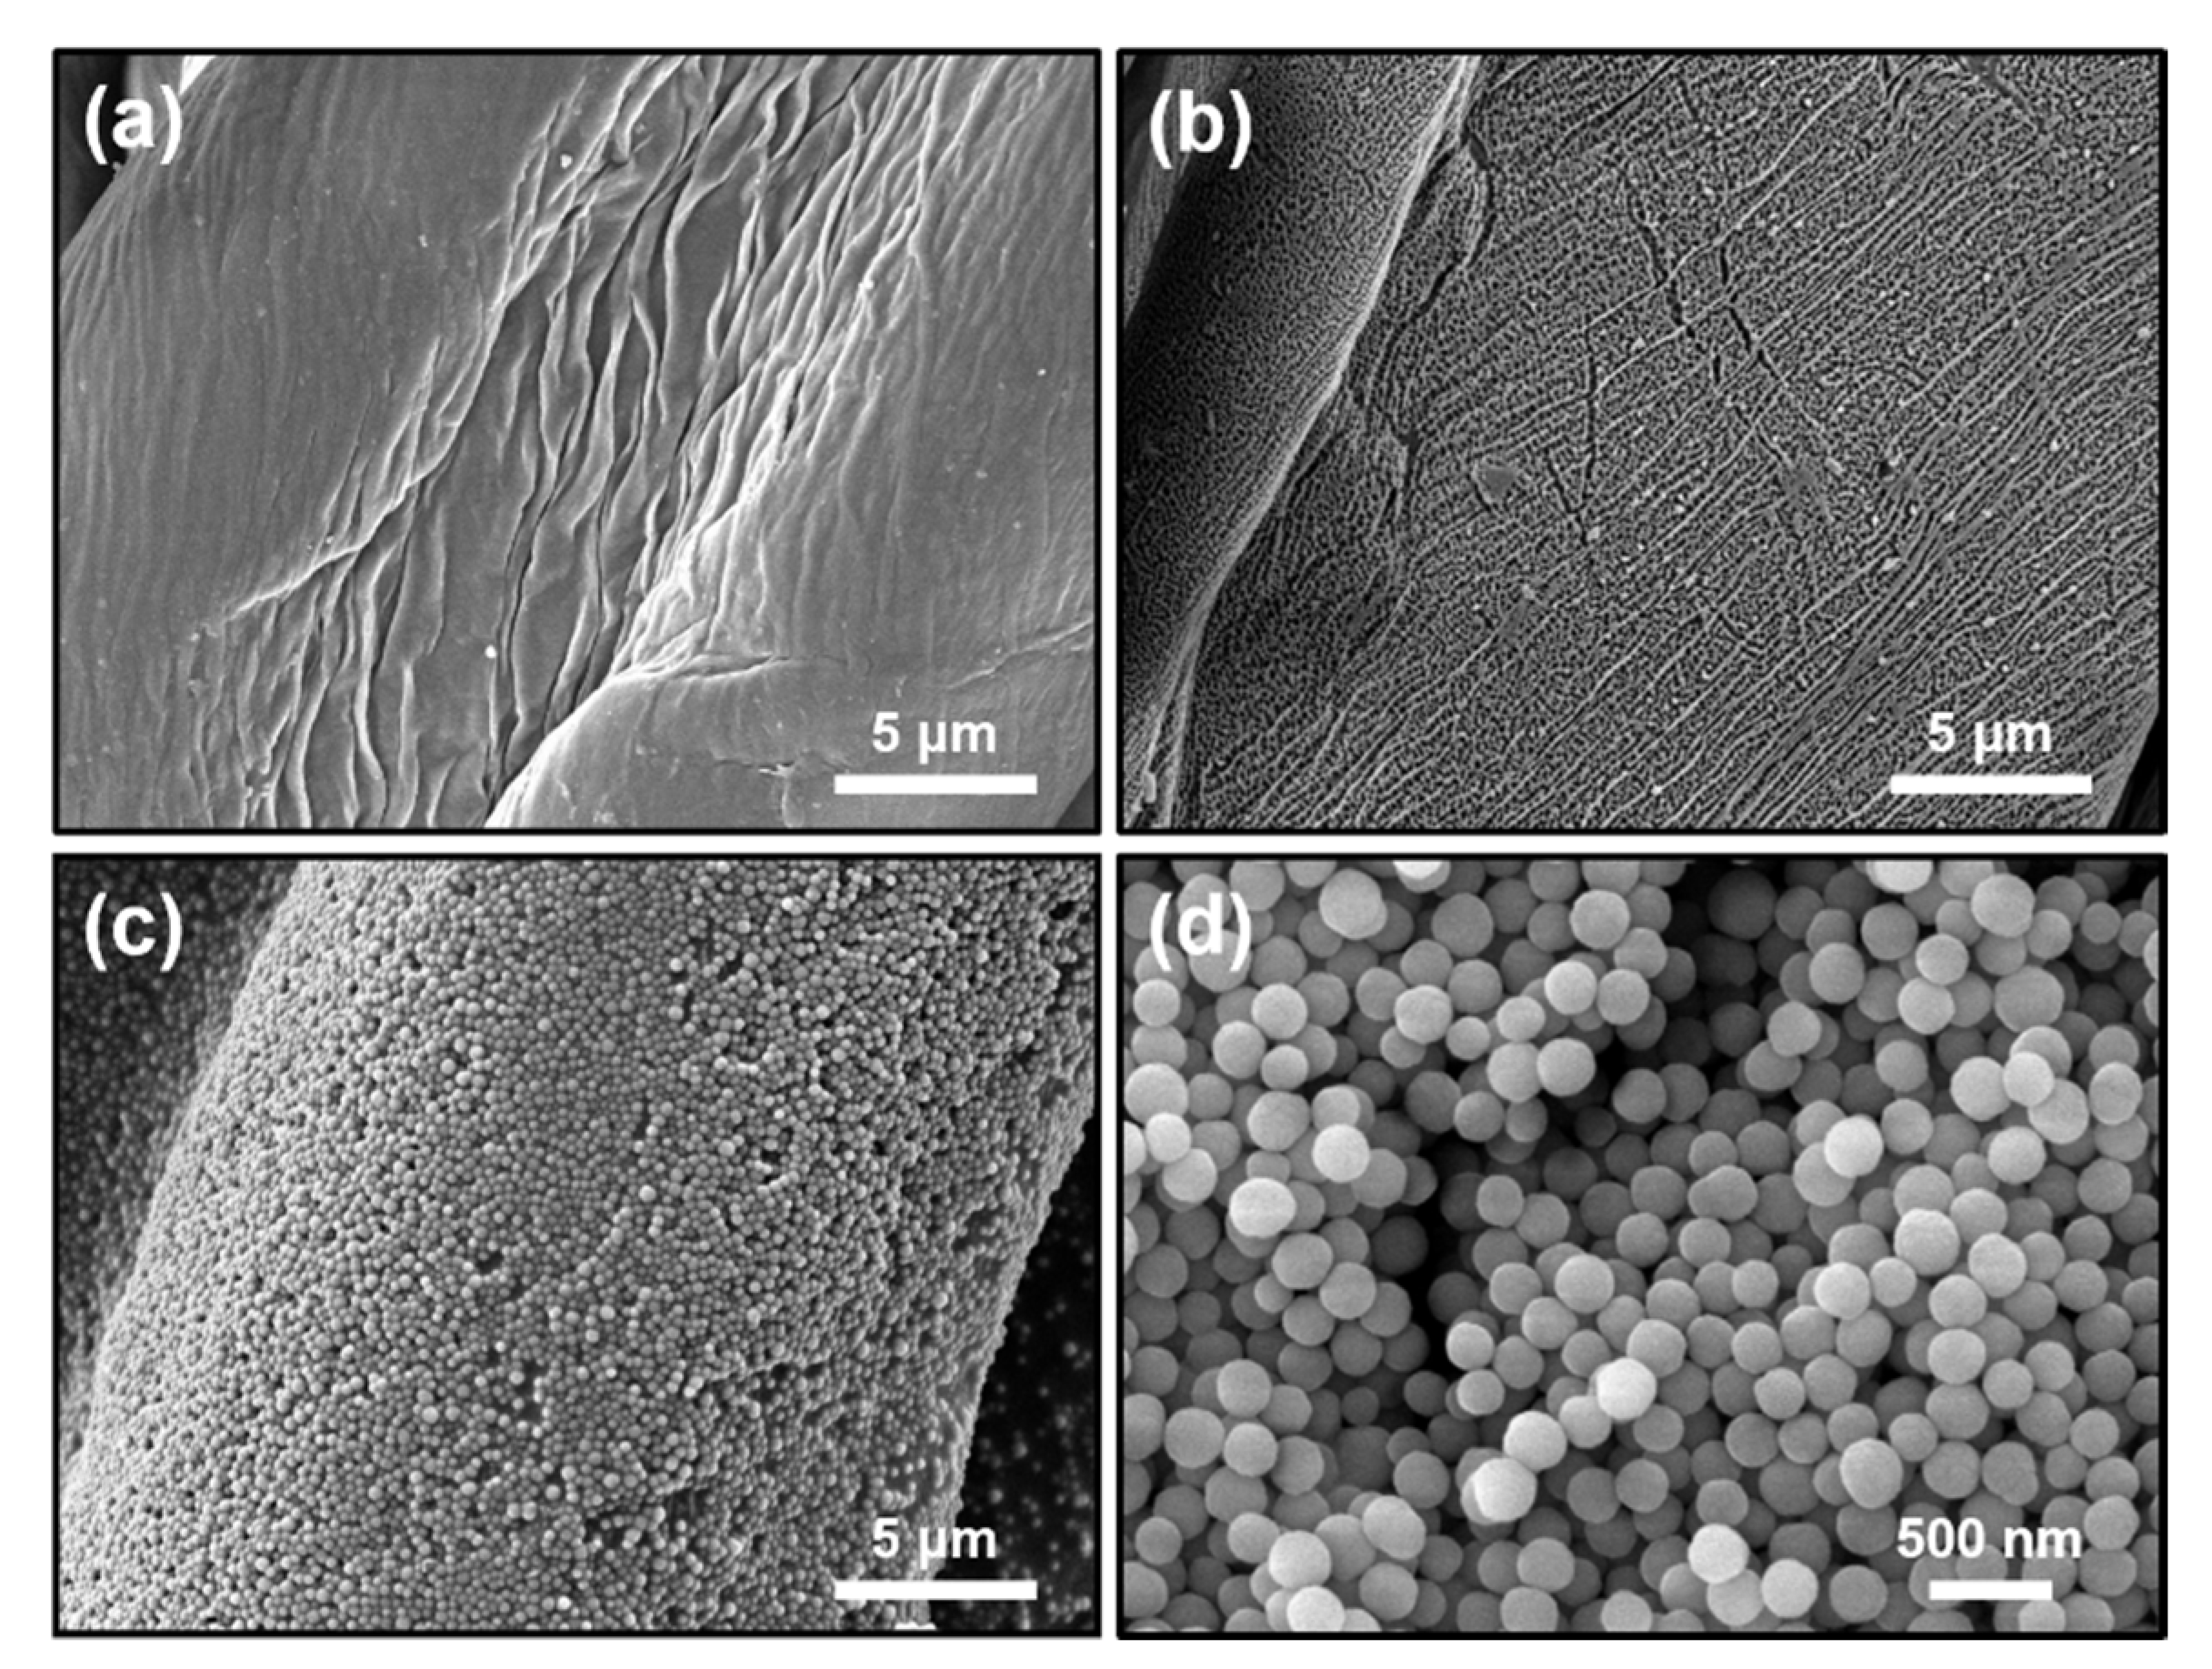 Polymers | Free Full-Text | Micro/Nanostructured Coating for Cotton  Textiles That Repel Oil, Water, and Chemical Warfare Agents | HTML